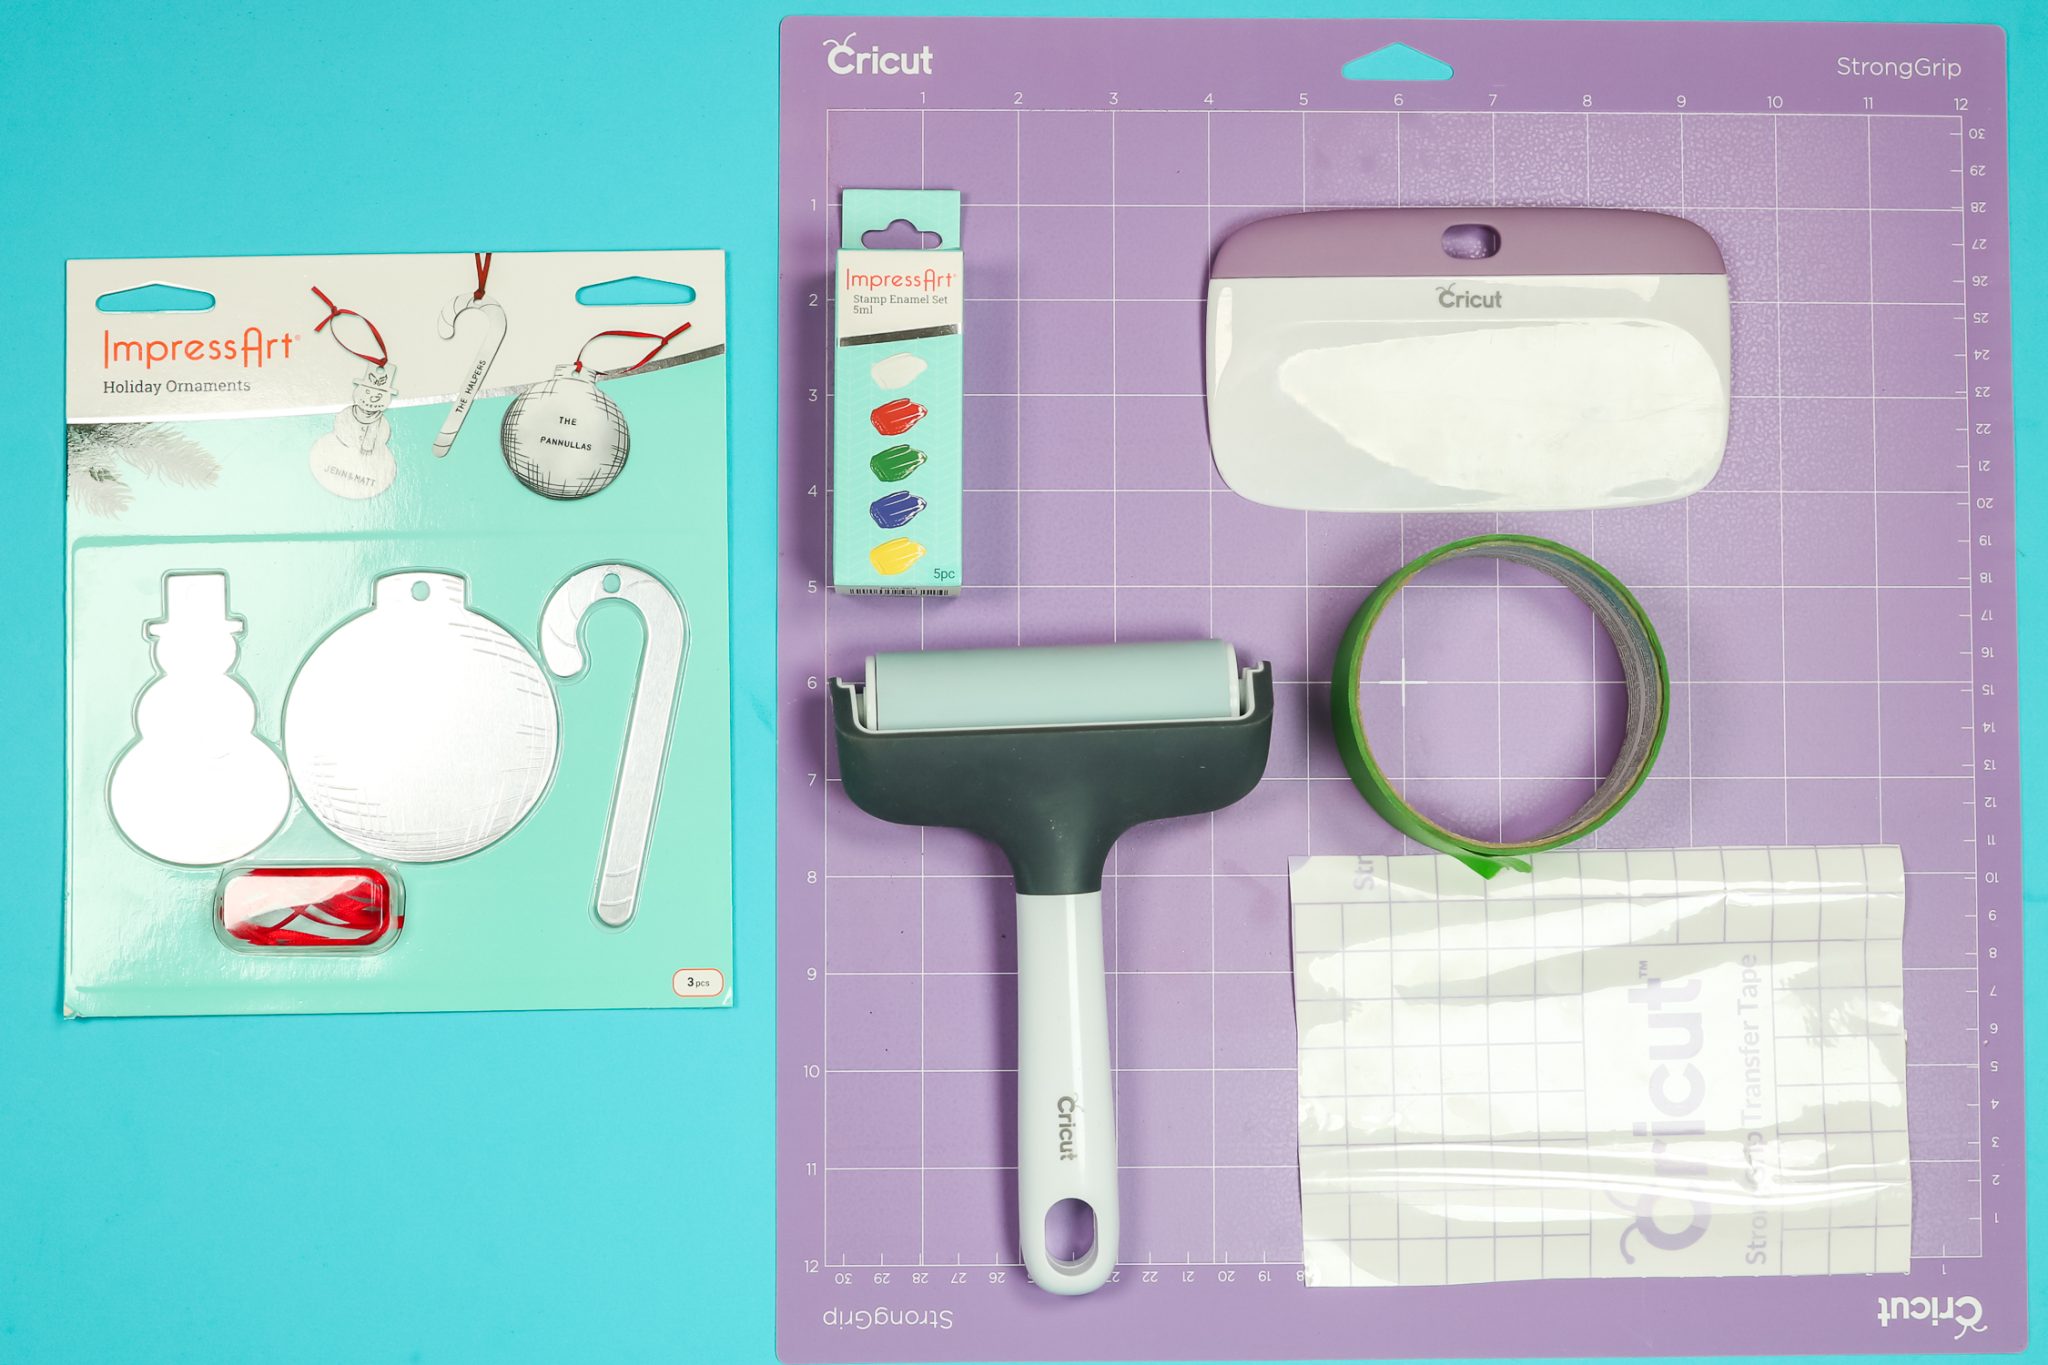 Supplies used for Cricut engraving.